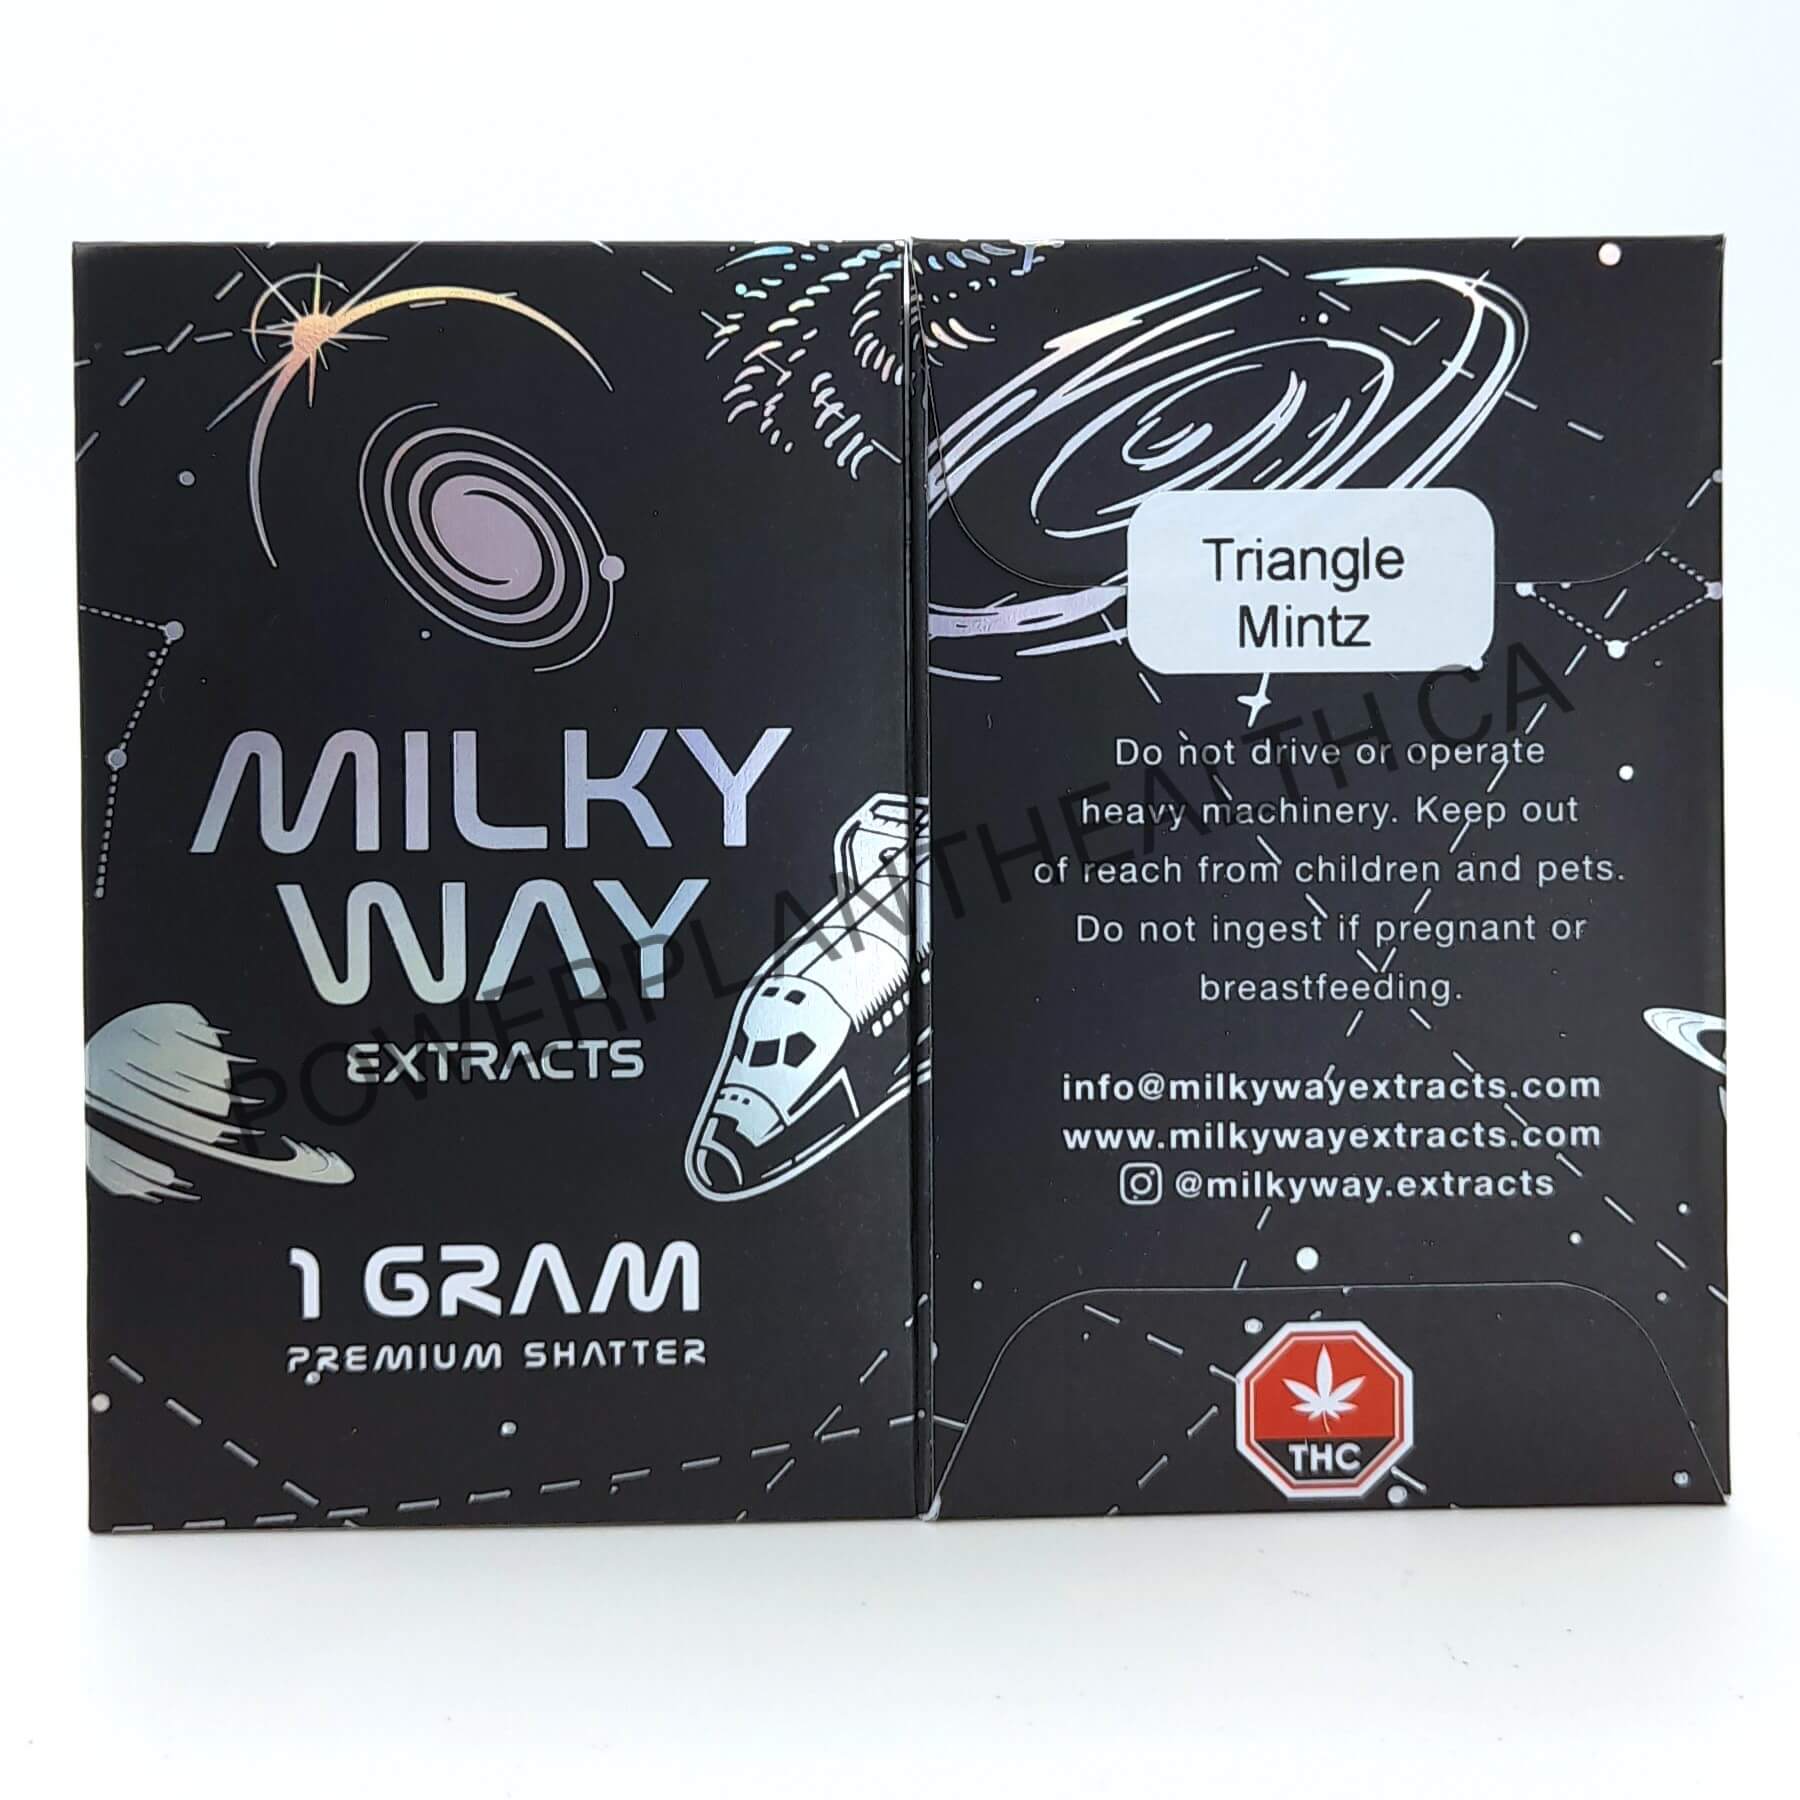 MILKY WAY EXTRACTS: PREMIUM SHATTERS